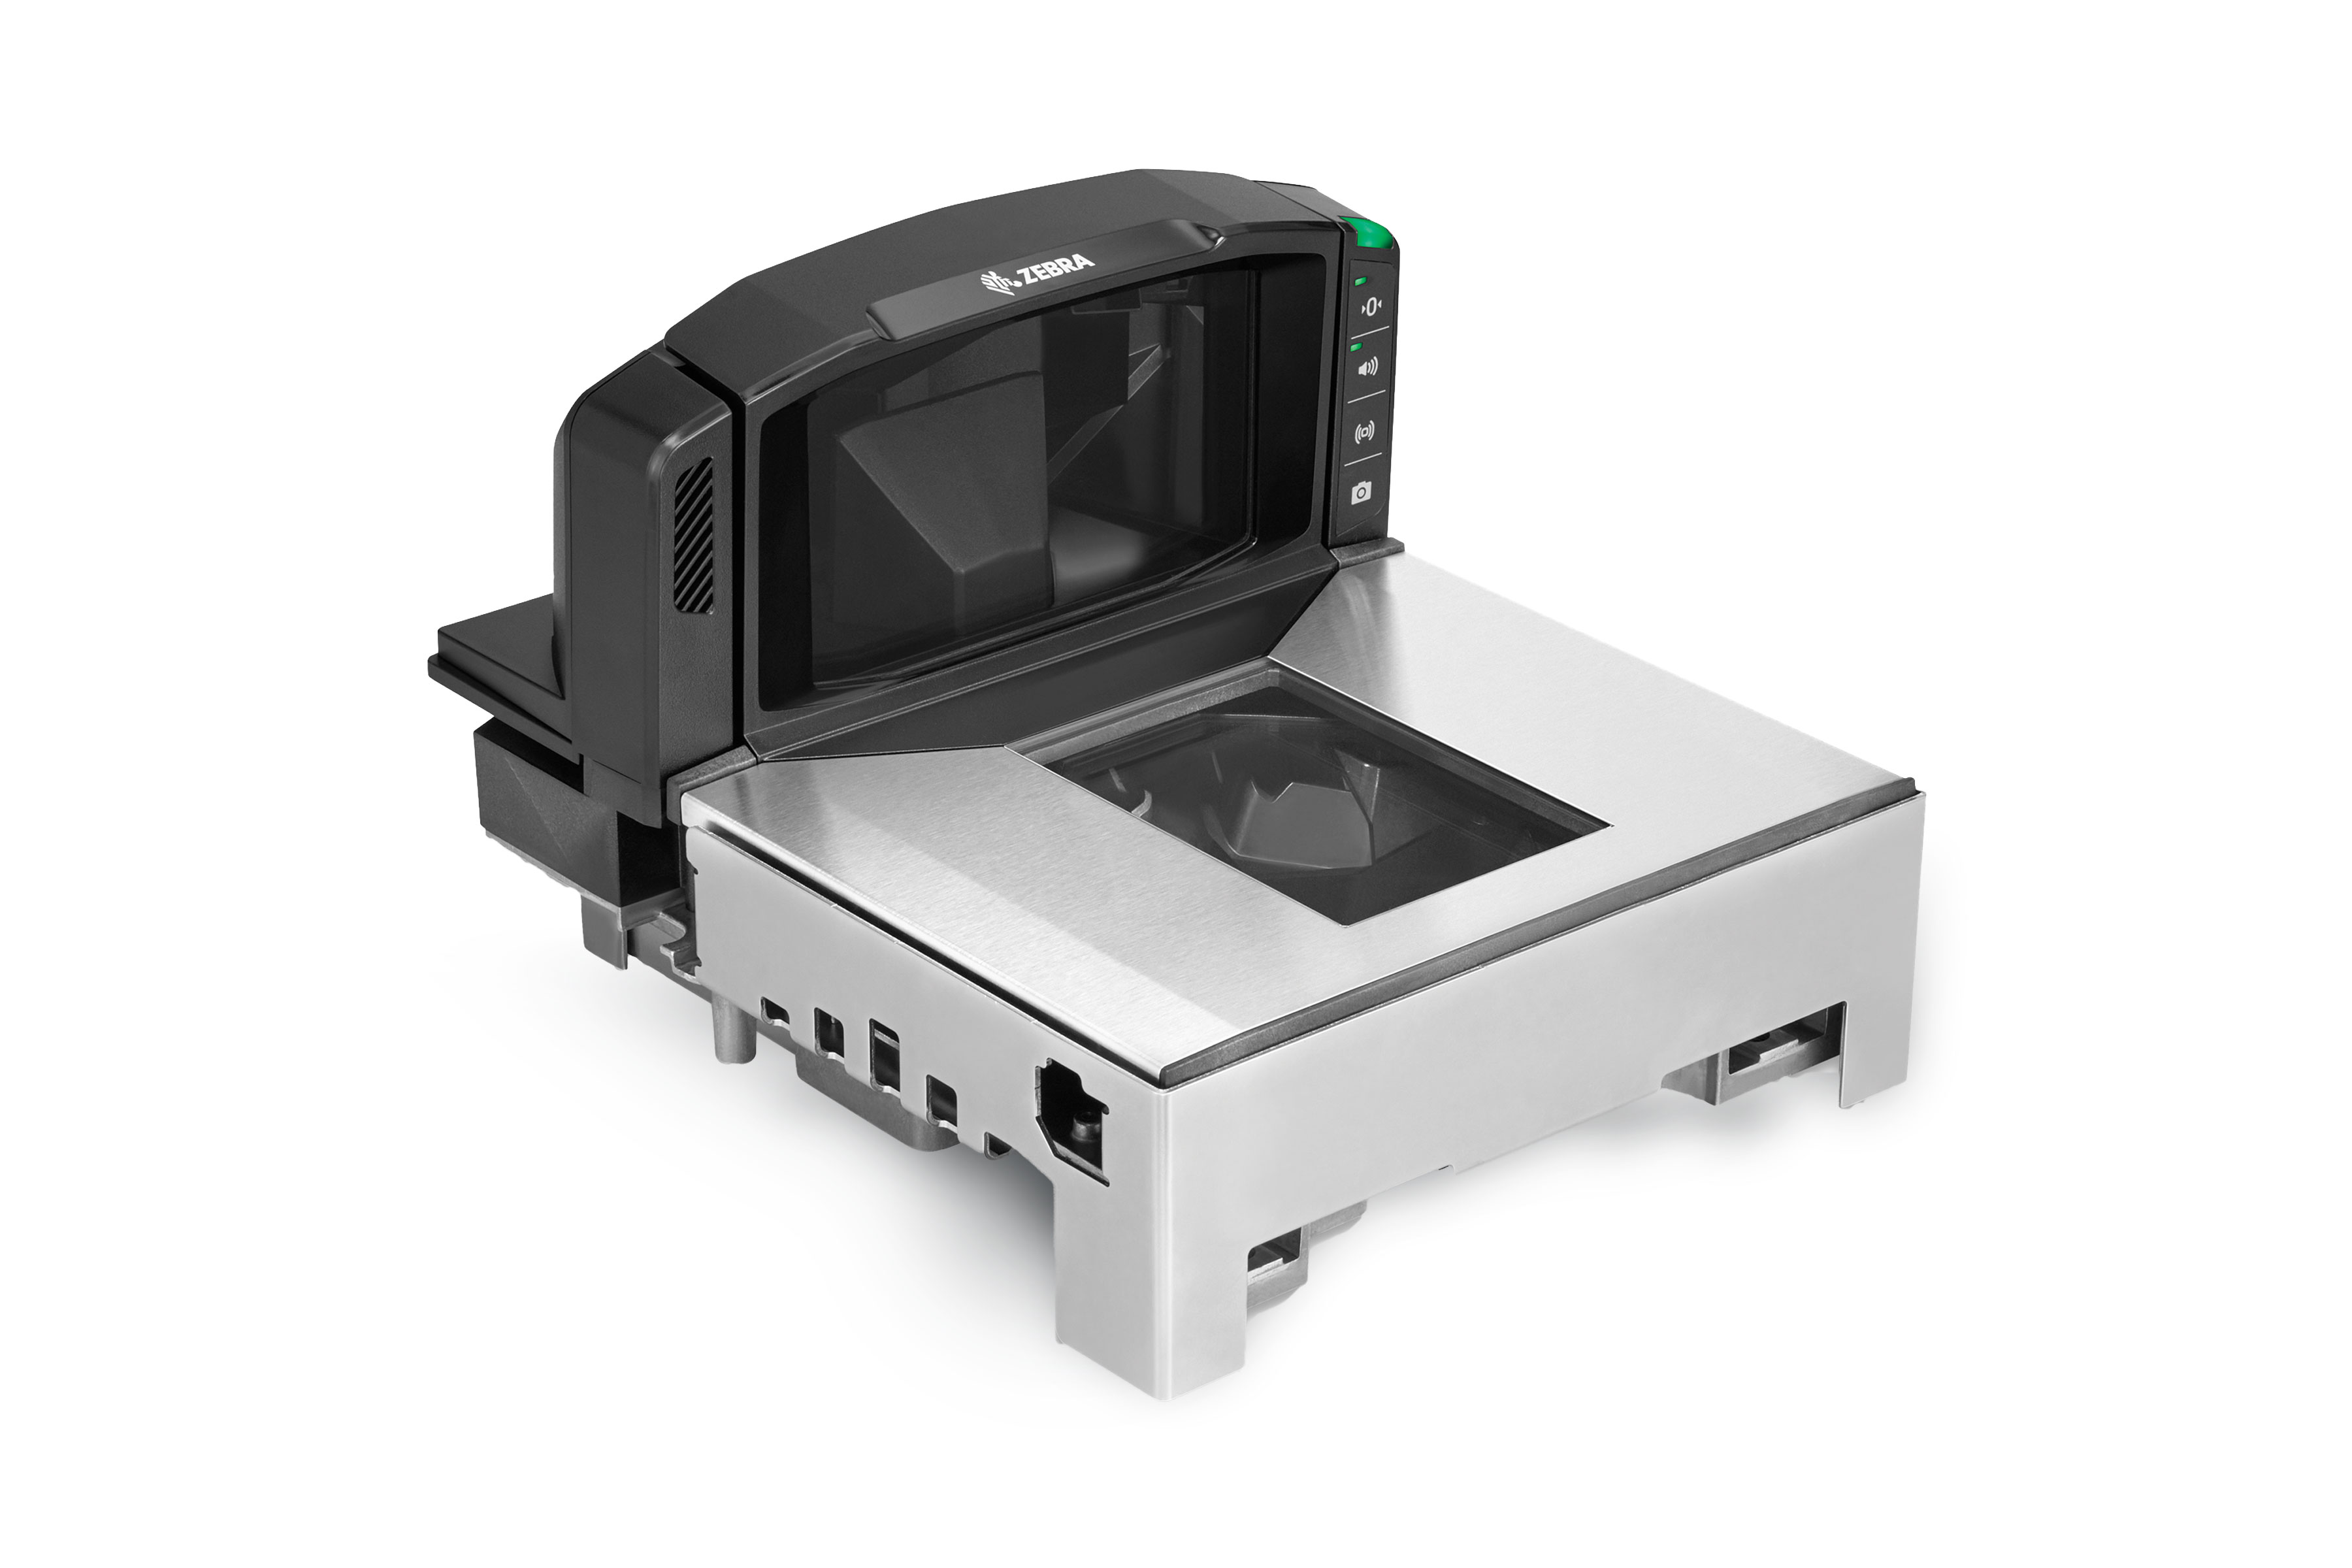 Zebra MP7000 grocery scanner scale, featuring multi-plane 1D/2D scanning capabilities